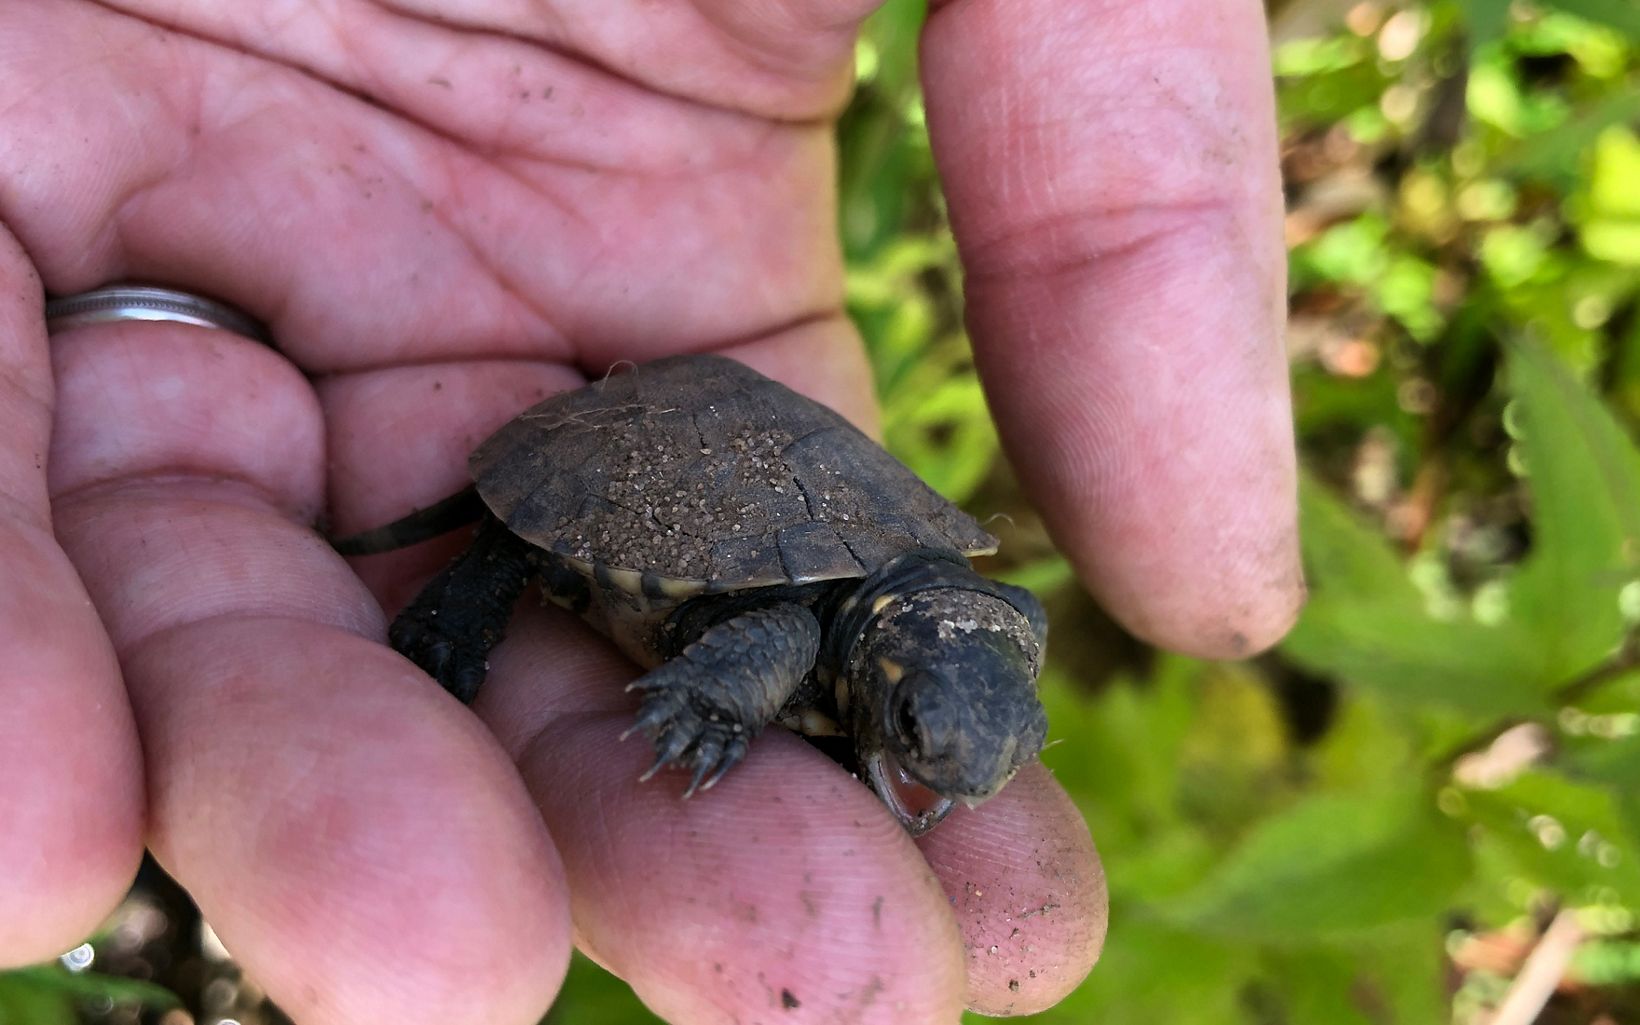 Blanding’s turtles need a diversity of connected habitats from wetlands to dry sandy uplands to survive and thrive.